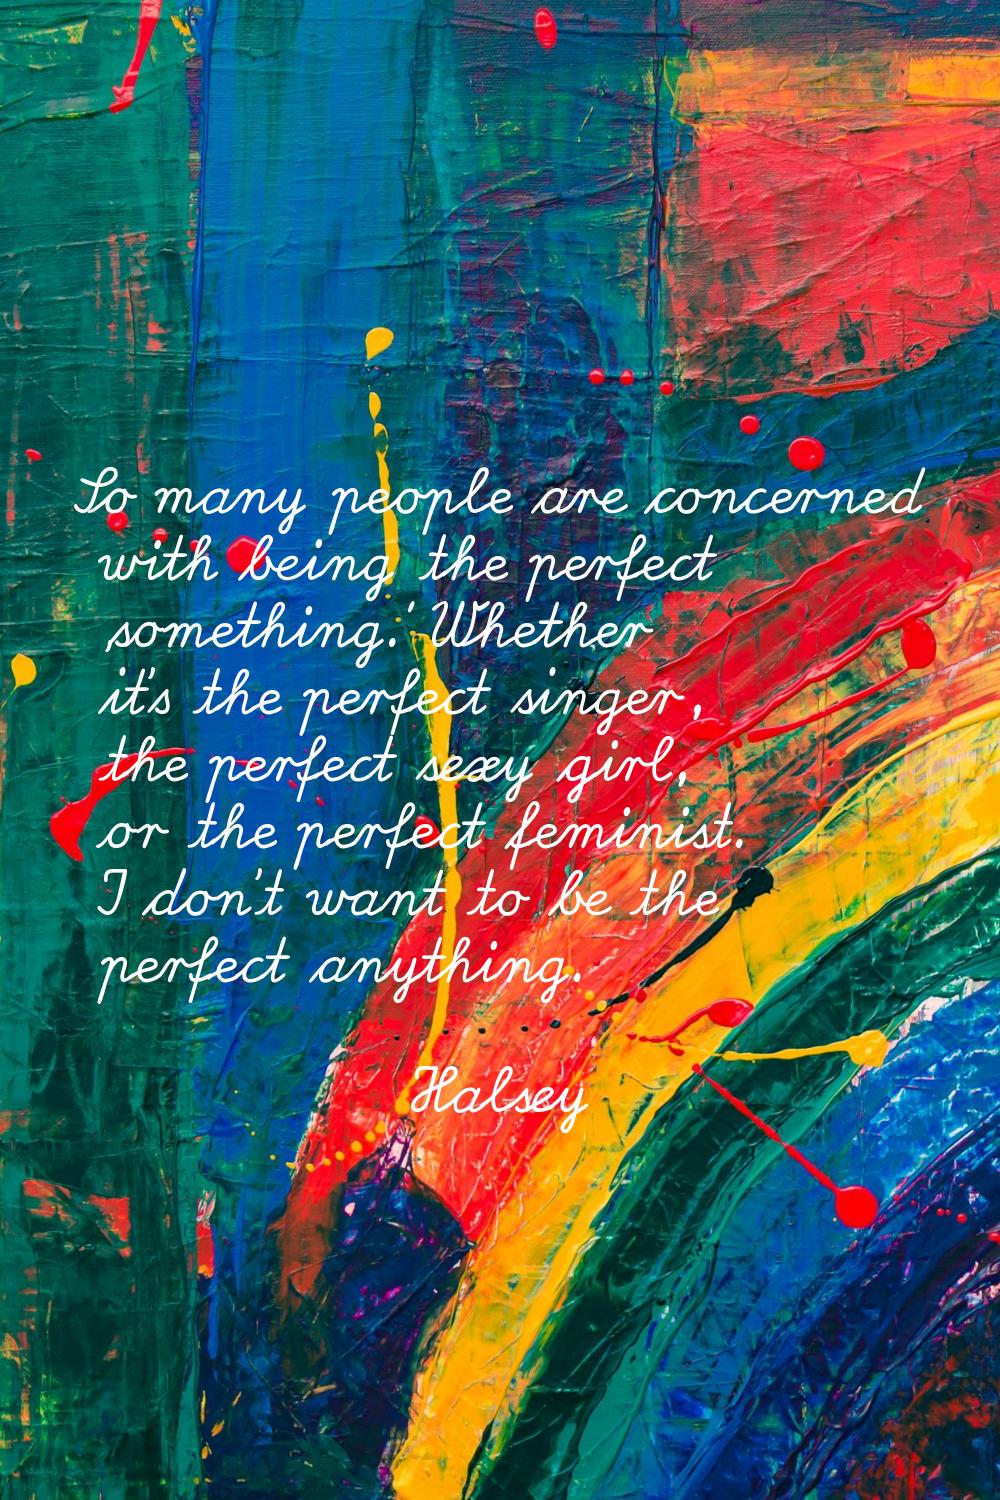 So many people are concerned with being the perfect 'something.' Whether it's the perfect singer, t